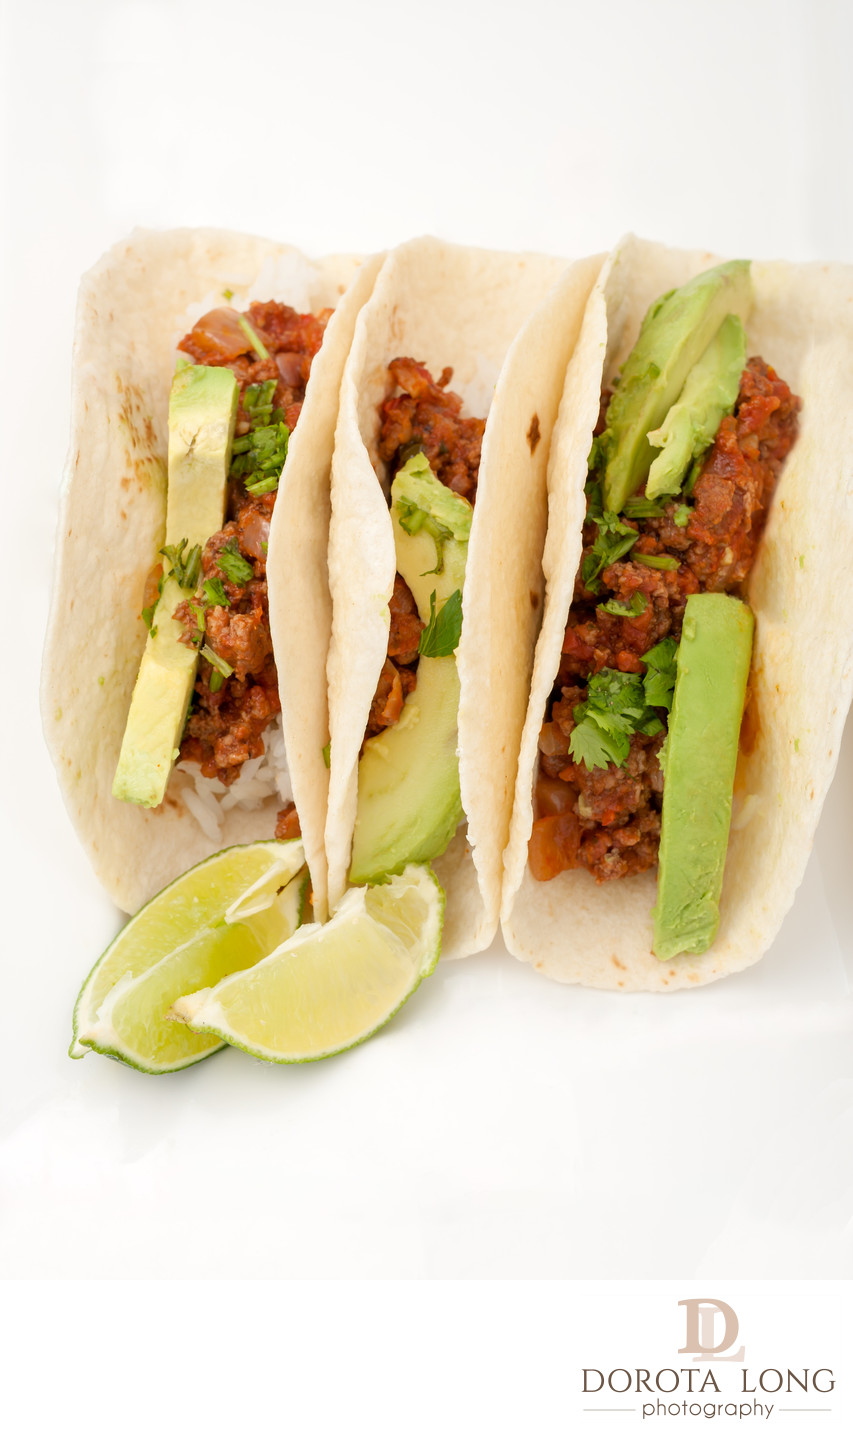 three homemade soft tacos with ground meat, avocados, cilantro and rice